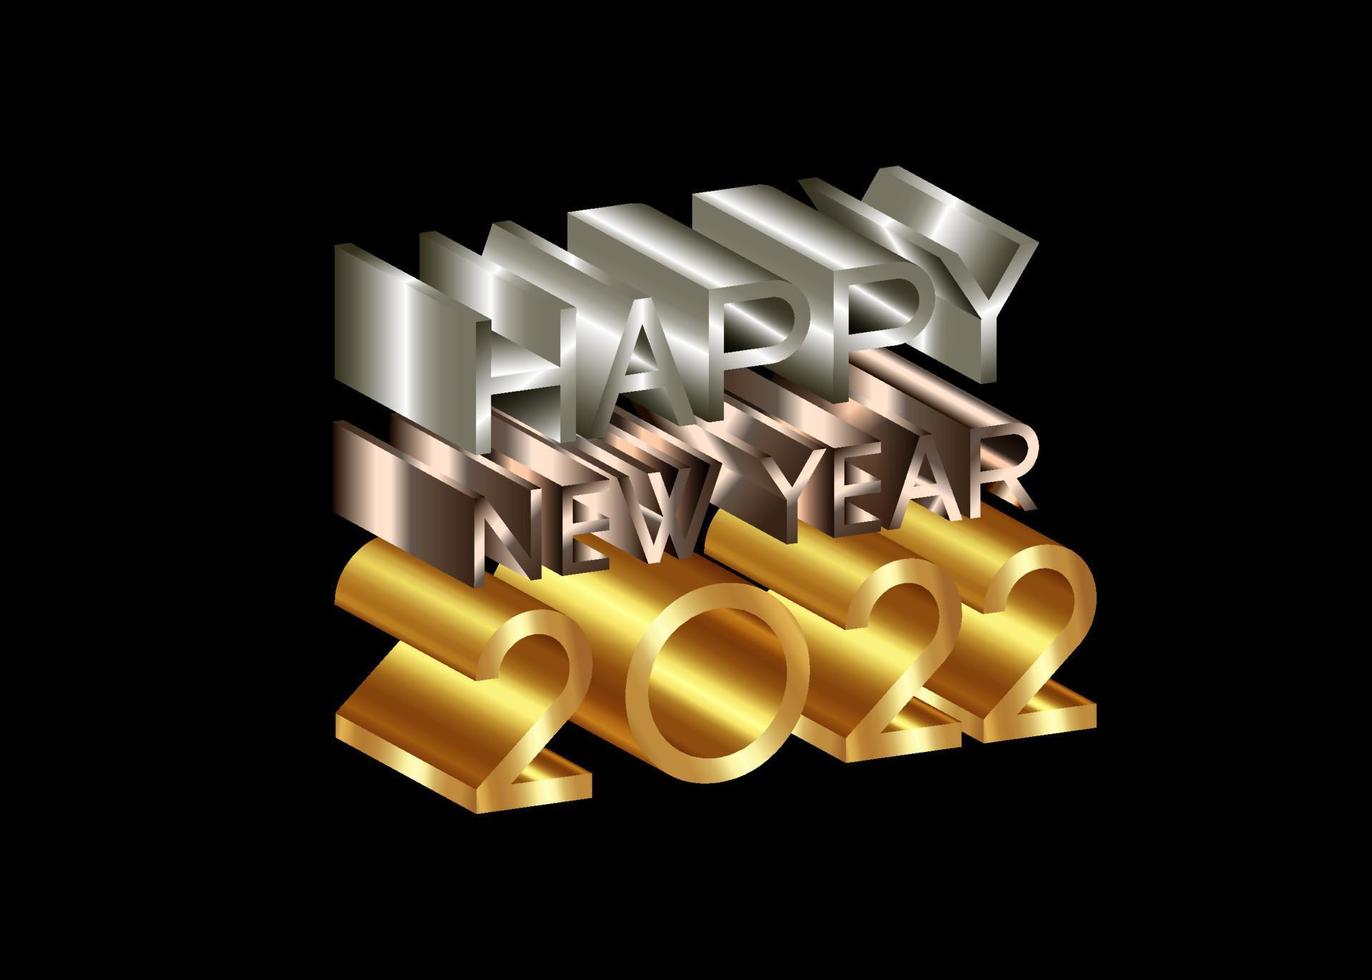 2022 Happy New Year, number and text 3D logo, gold, bronze, silver texture. Holiday greeting card. Vector illustration isolated on black background for banner, invitation, calendar, party, vip card